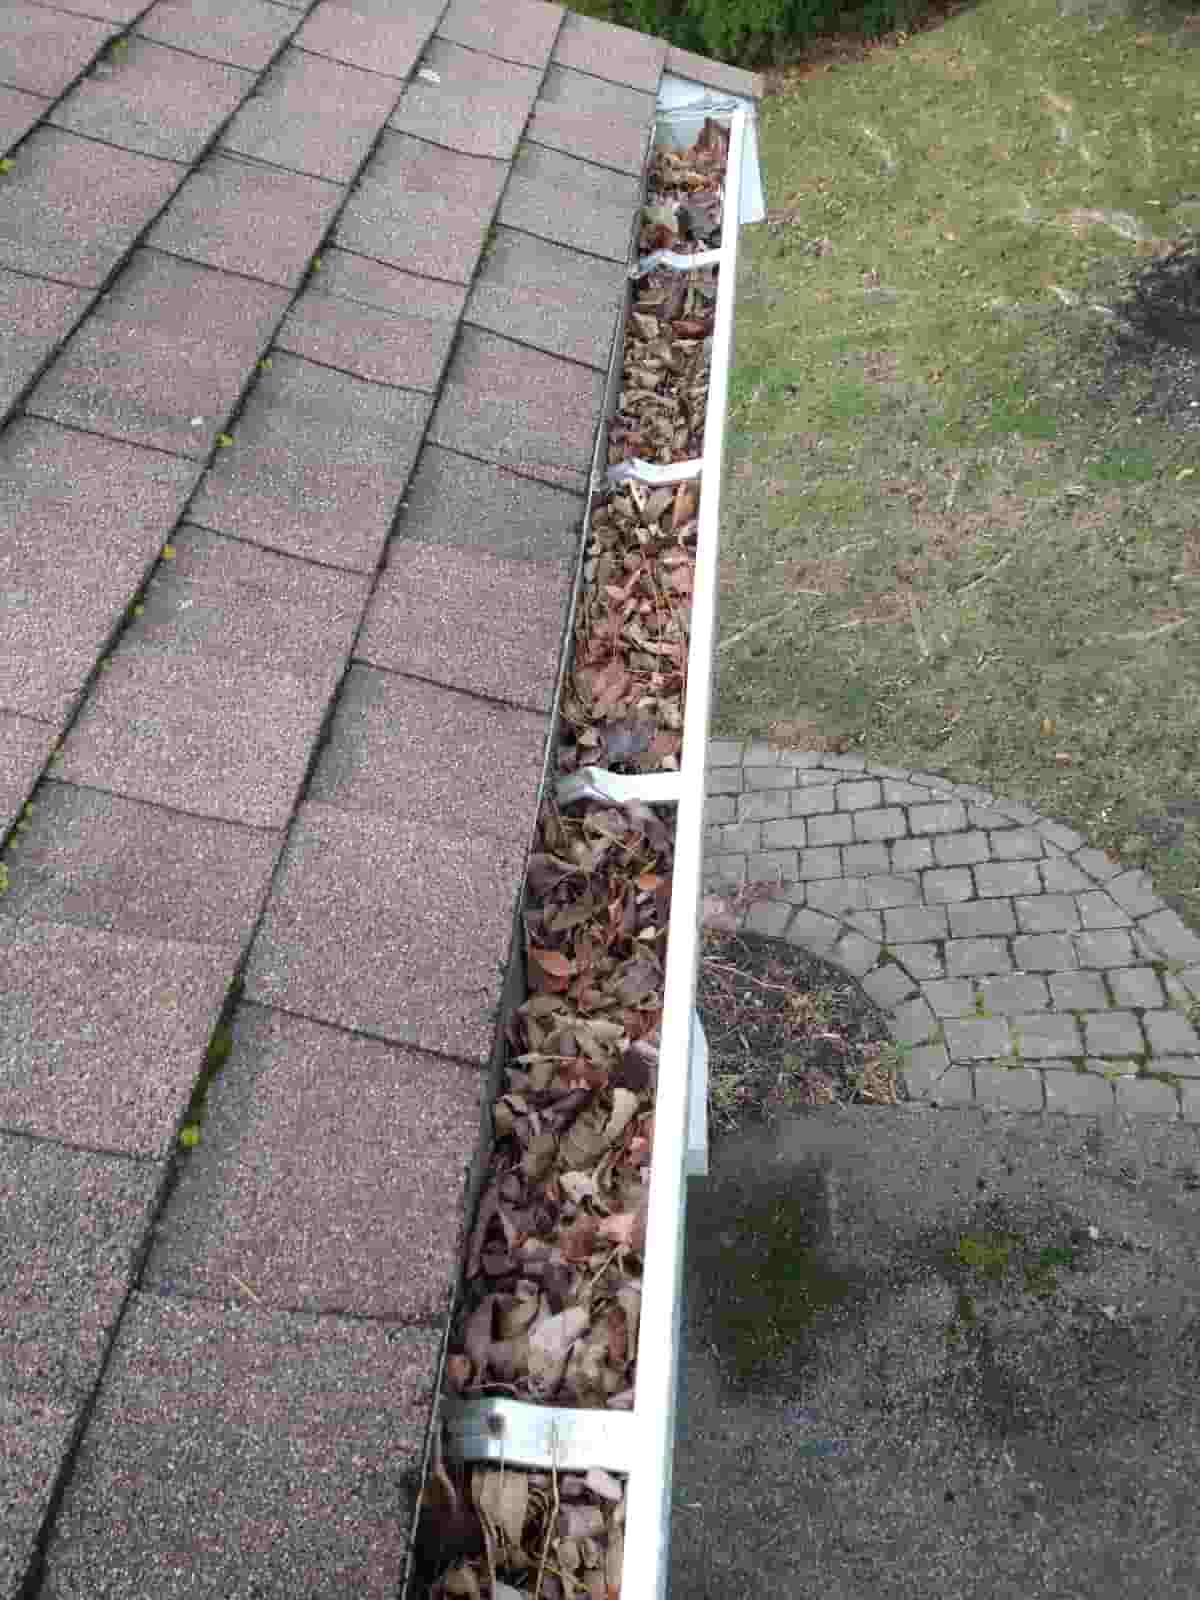 gutter cleaning tips and tricks